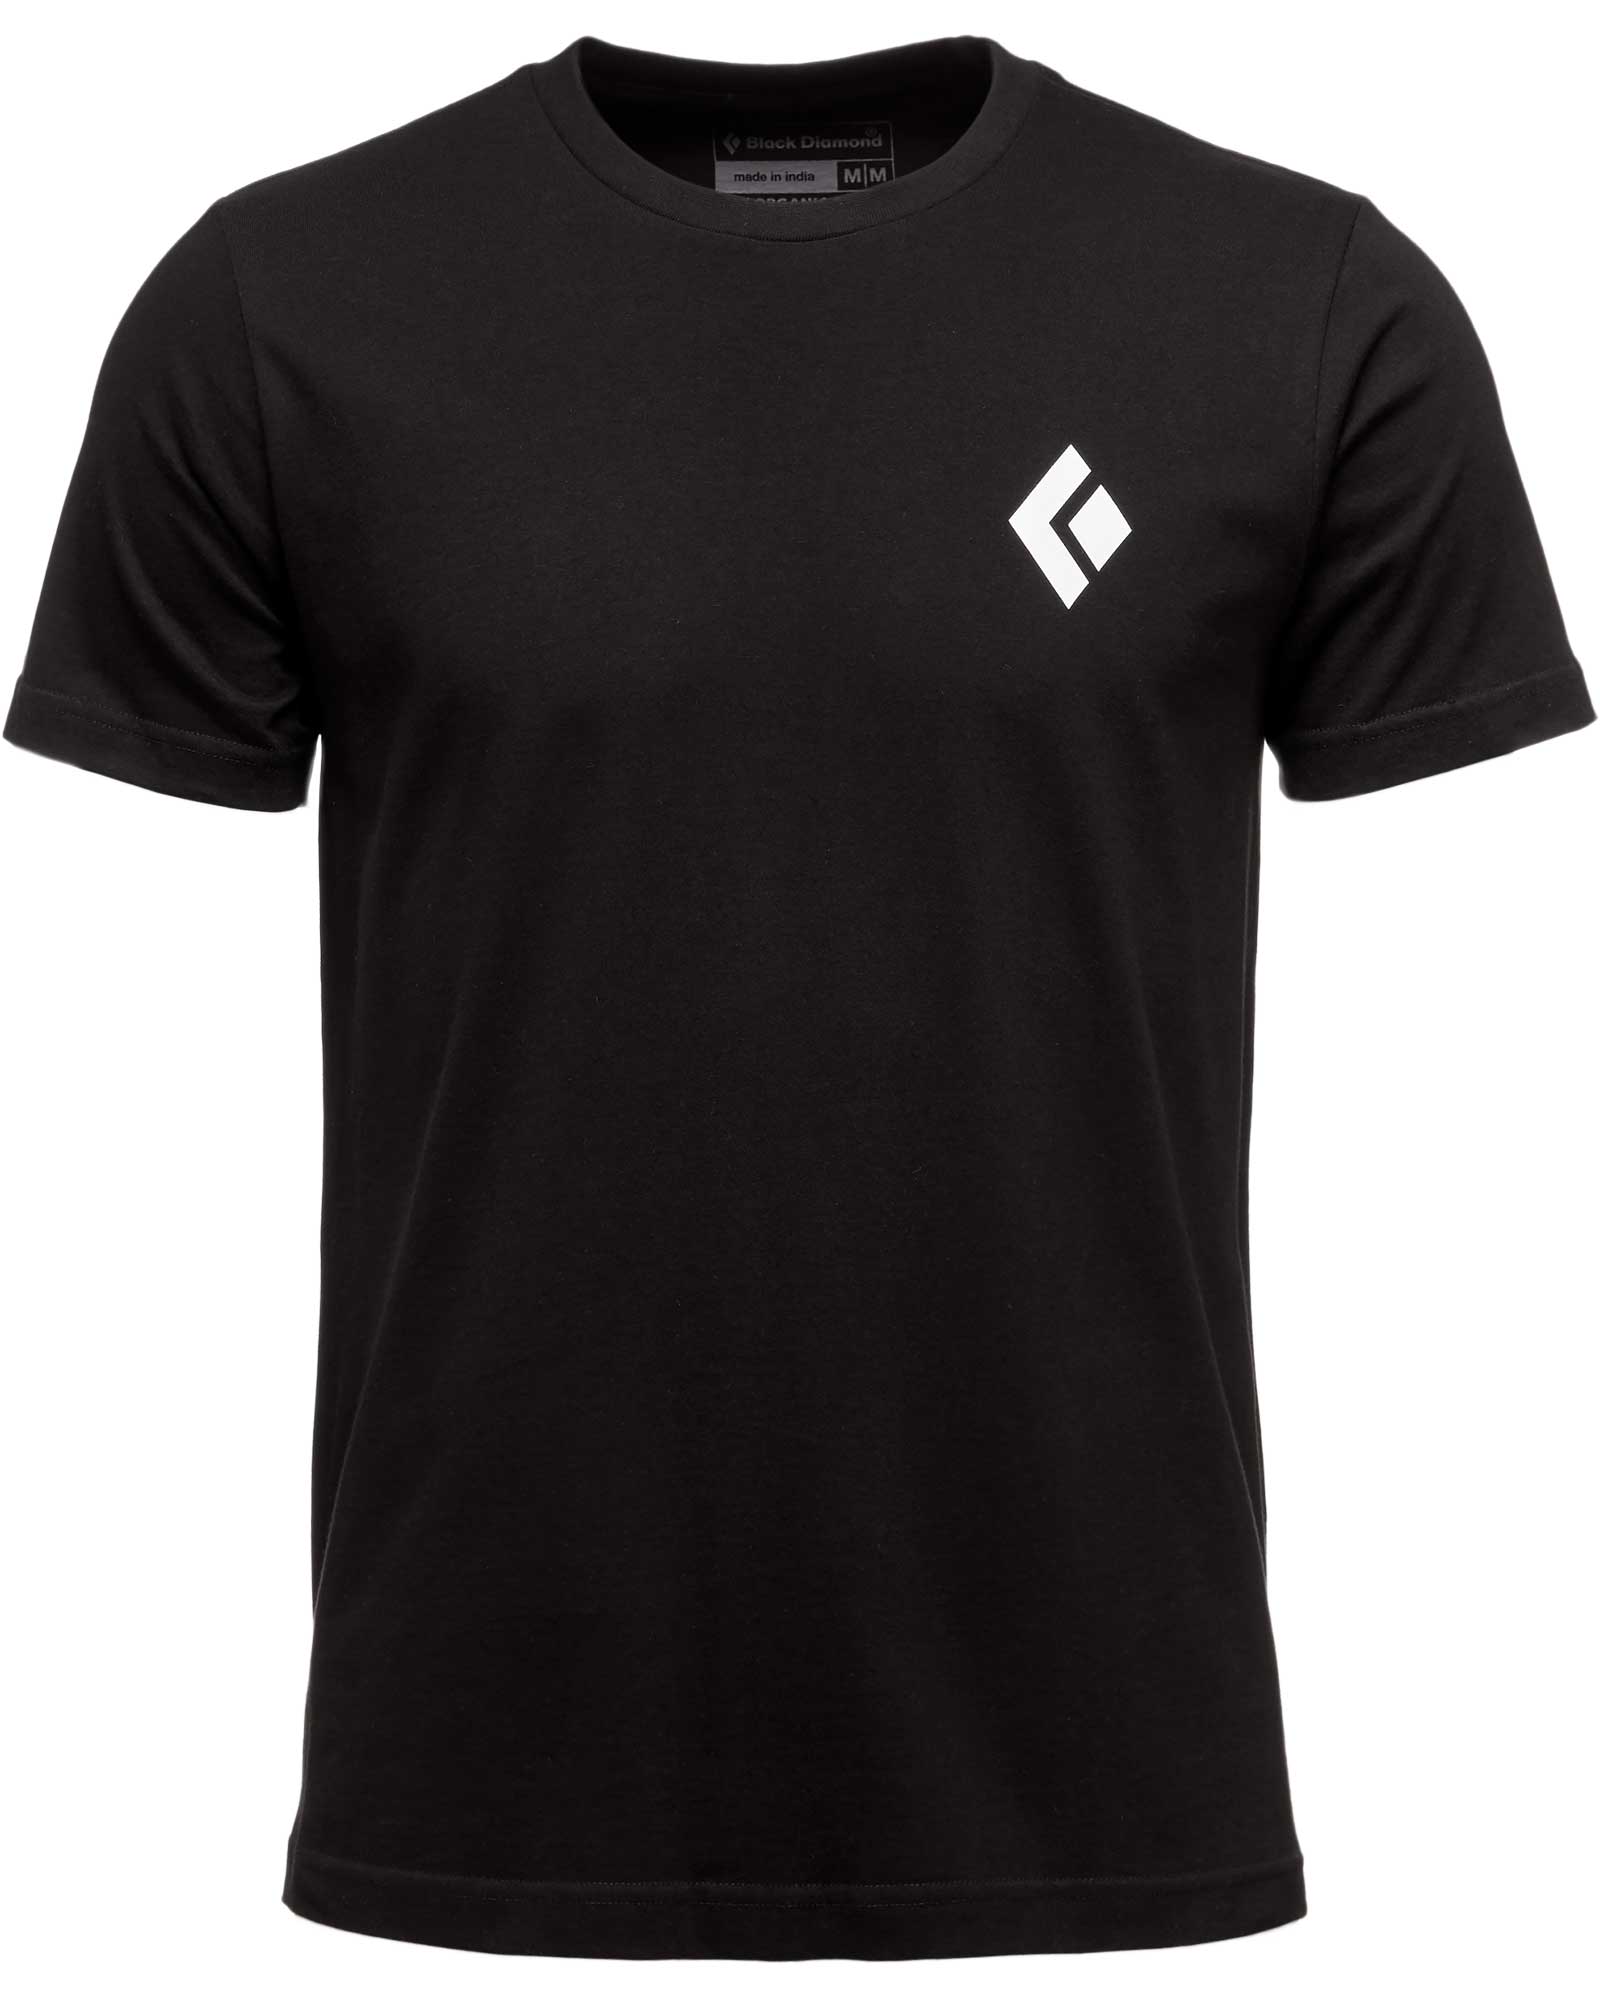 Product image of Black Diamond equipment for Alpinists Men's T-Shirt